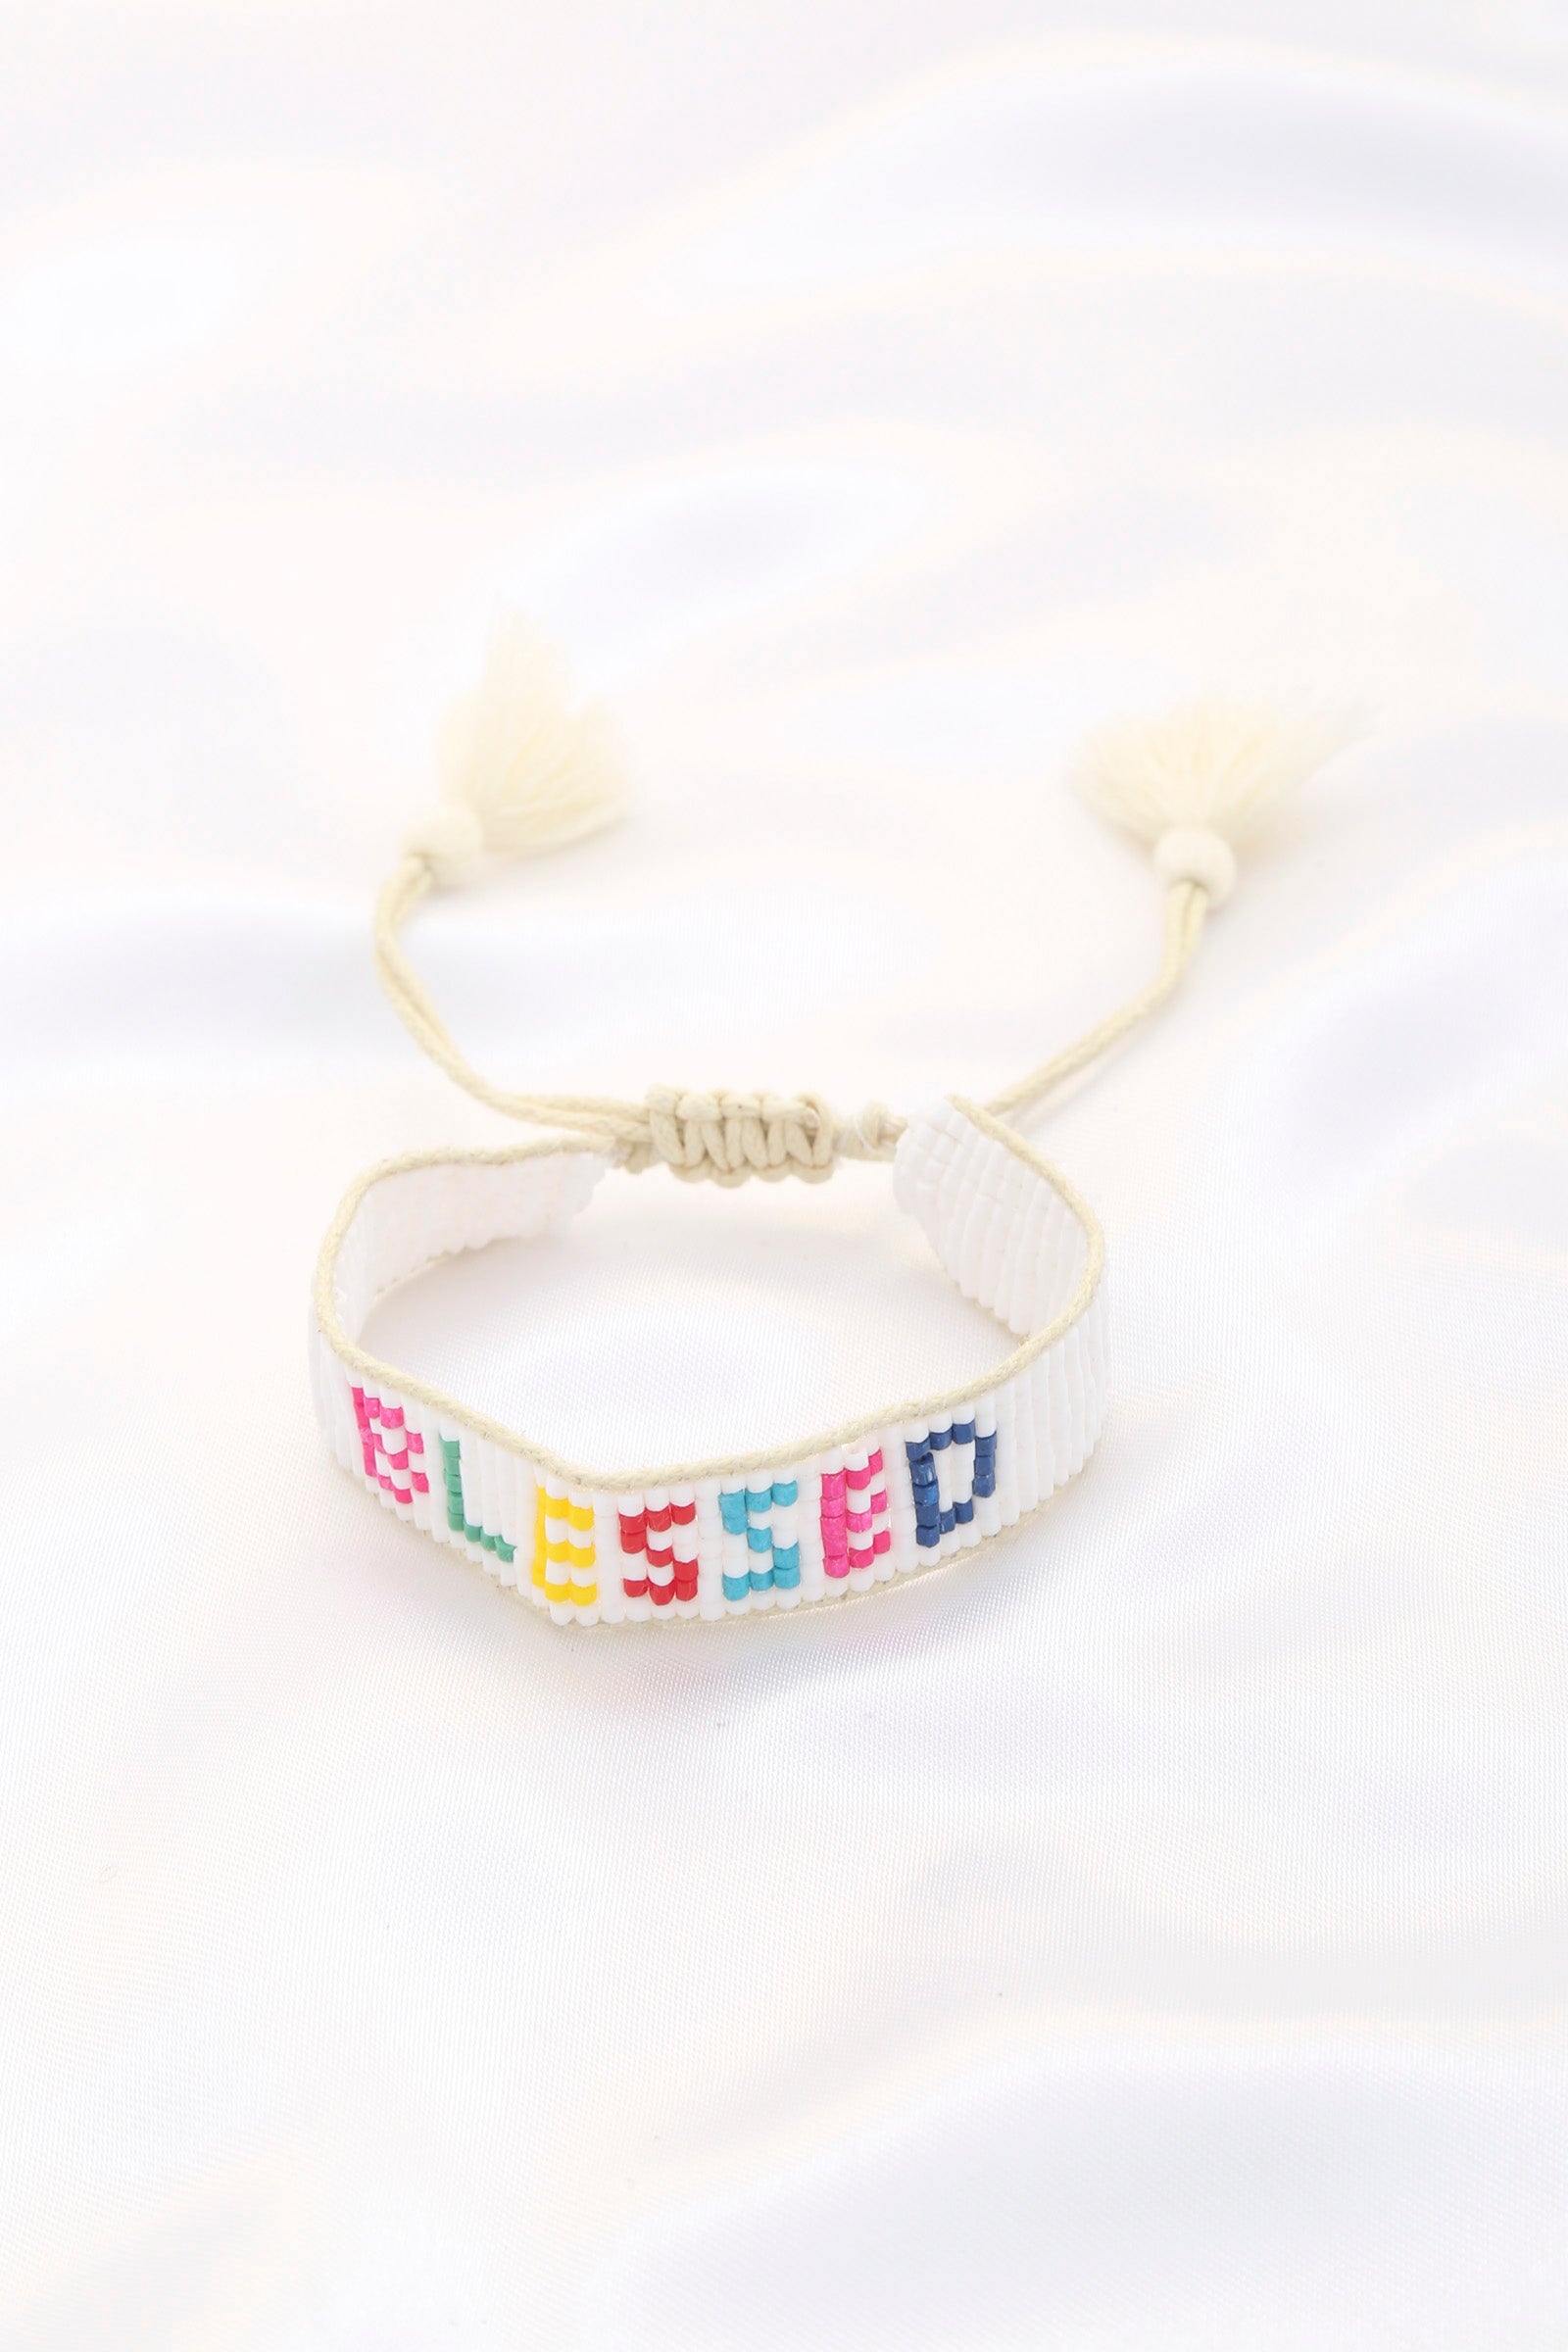 Blessed Bead Pull Tie Bracelet Sunny EvE Fashion